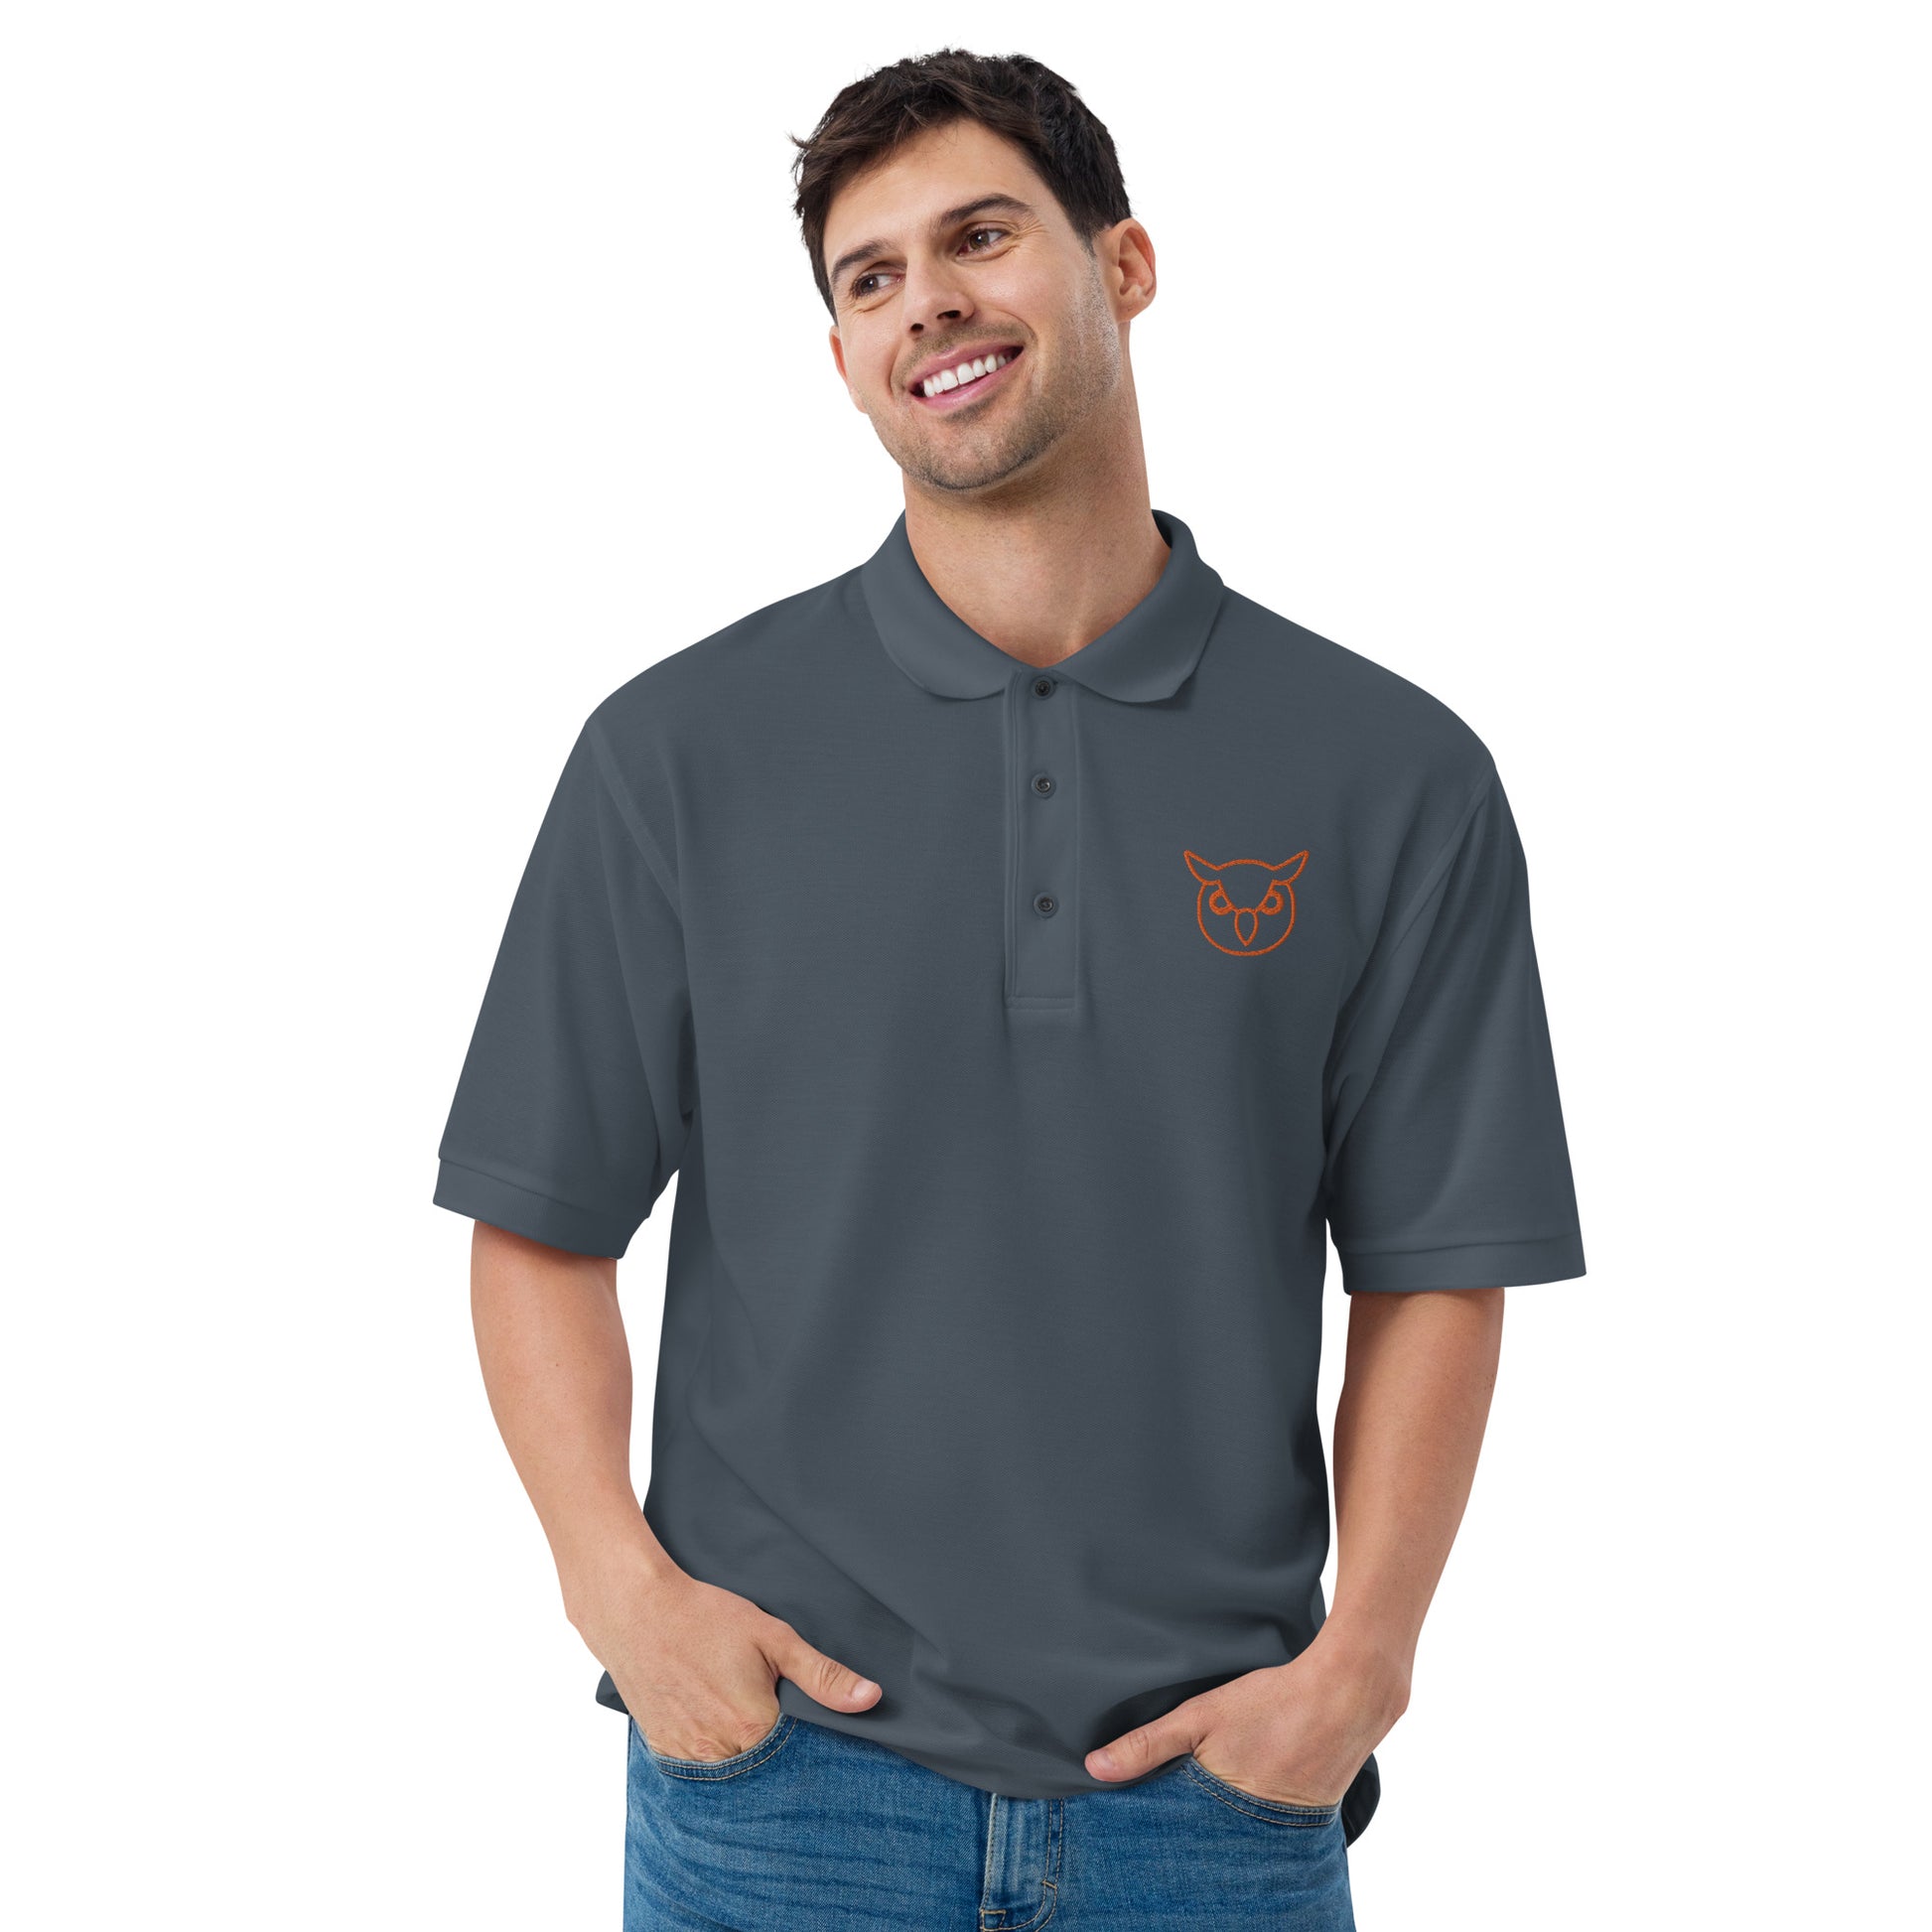 Men with grey poloshirt with on front a owl in brown embroidered